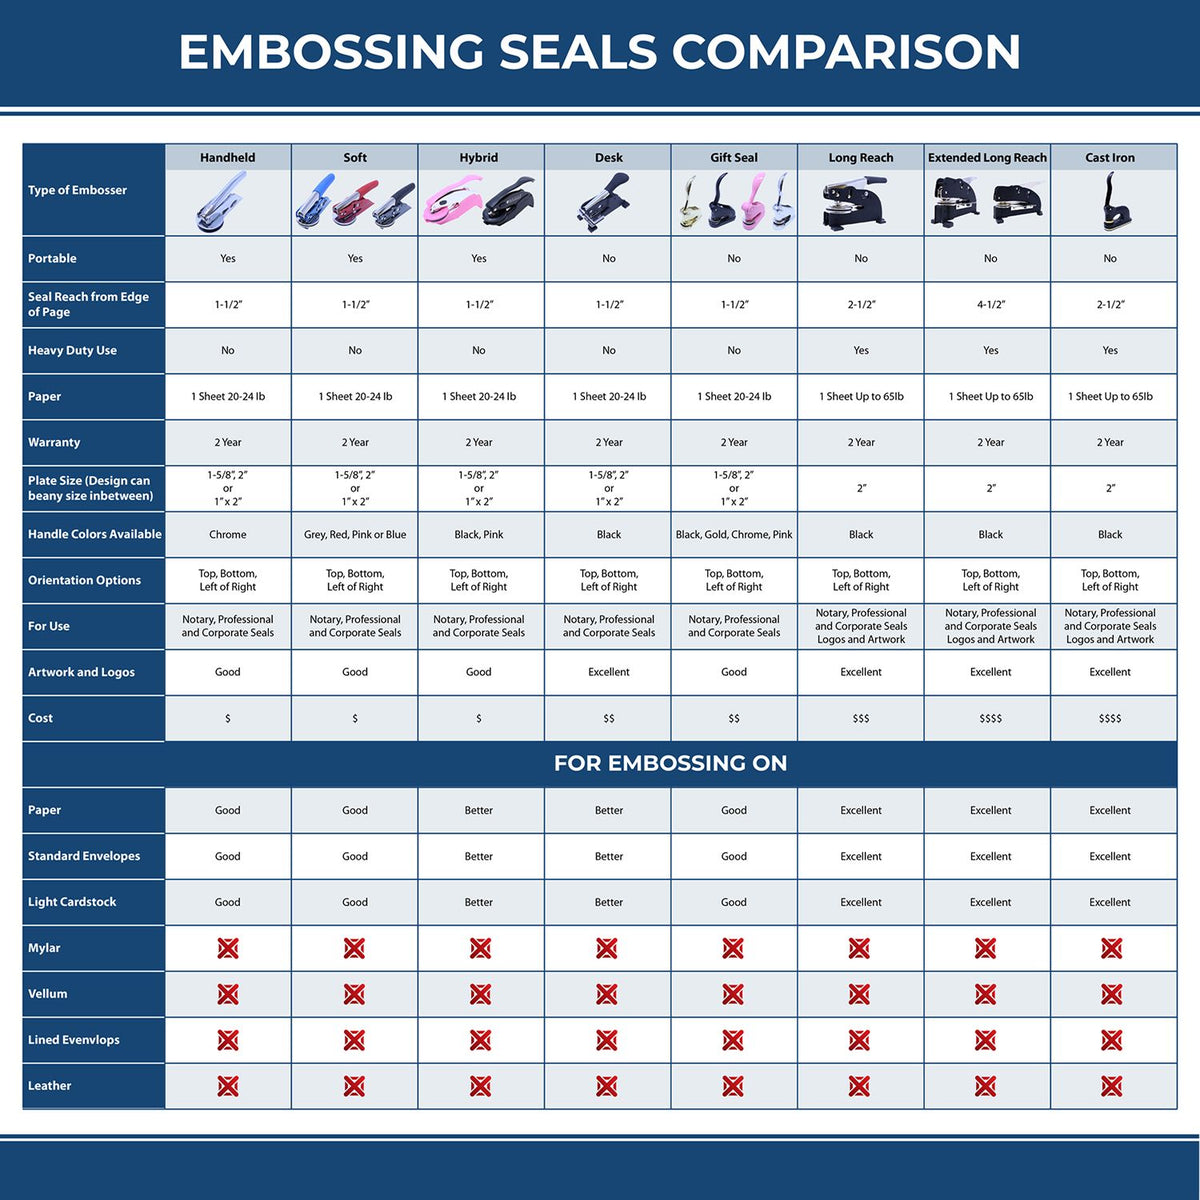 A comparison chart for the different types of mount models available for the Idaho Desk Surveyor Seal Embosser.